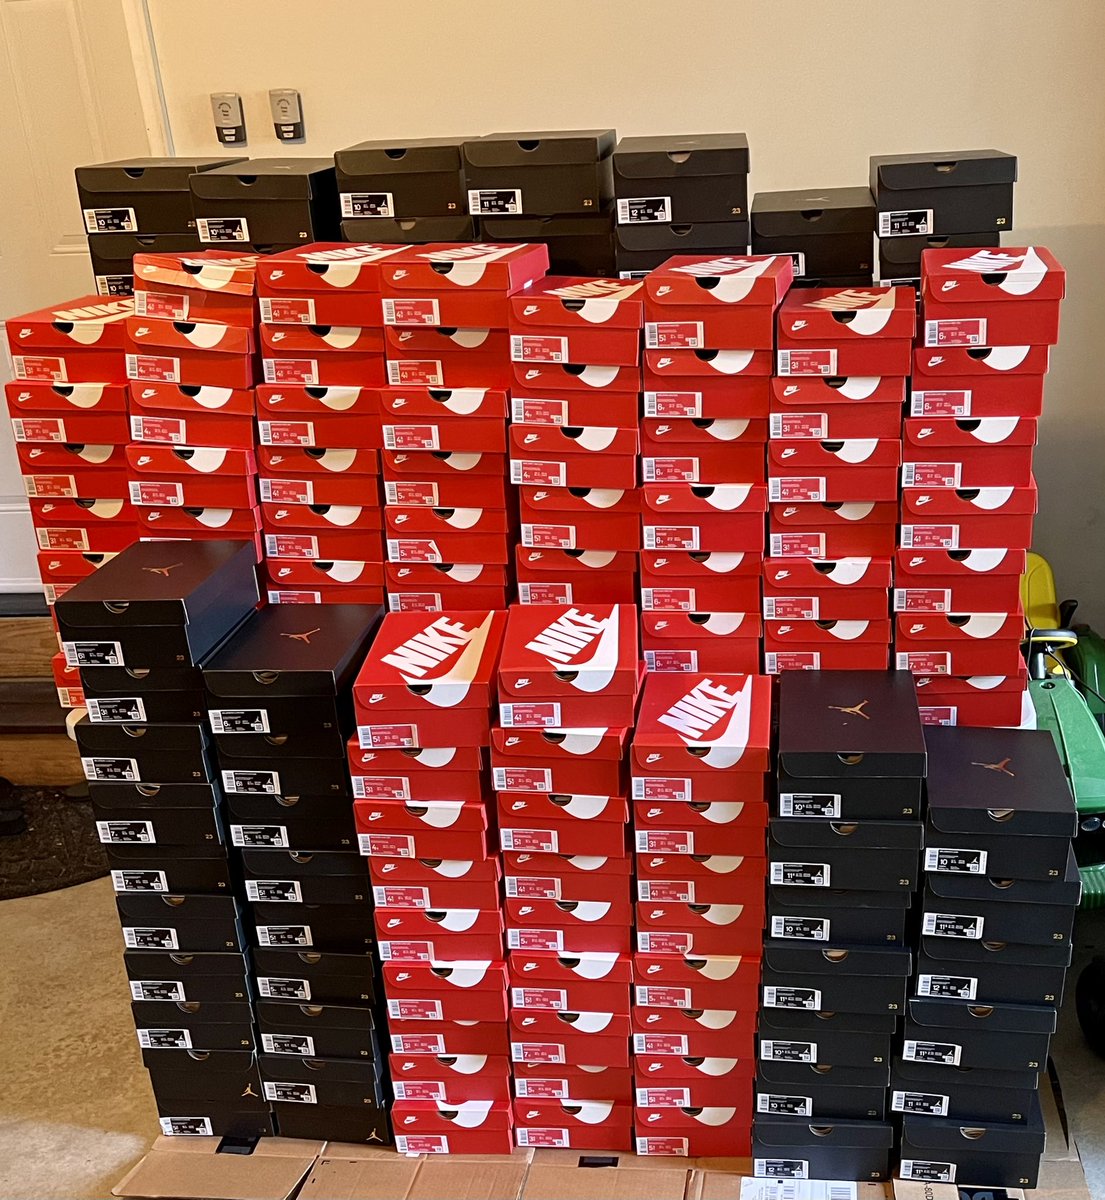 Got this table screaming out “no mas” @LinearAIO @Lucky_AIO @OculusProxies @TheXYZStore @TheTenCooks @AnotherFnf @guppypond @SplashXGroup